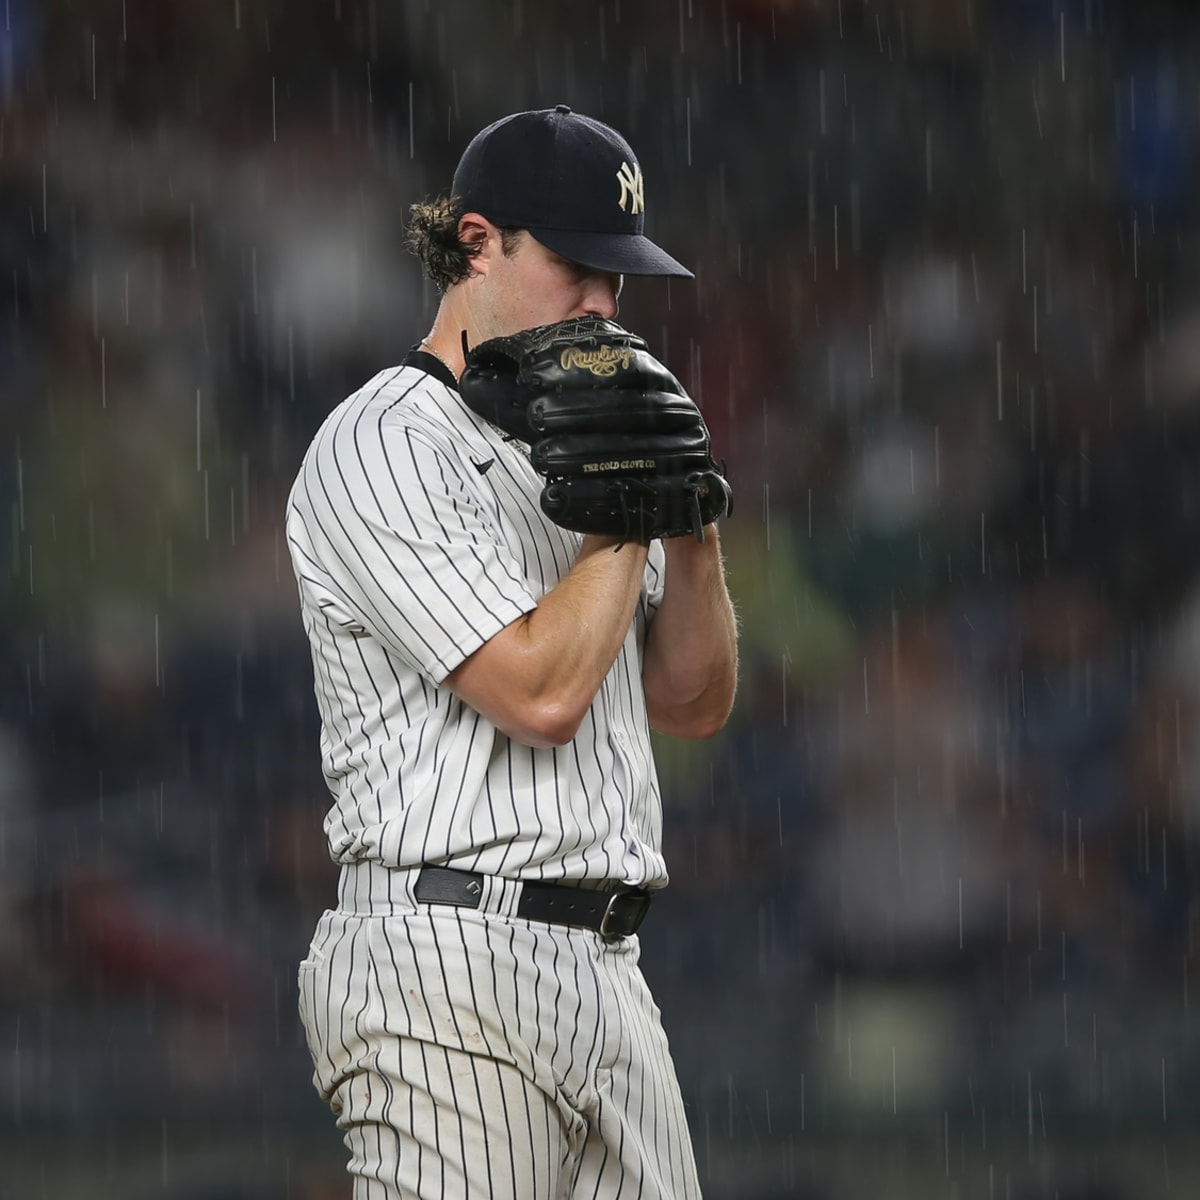 Yankees ace Gerrit Cole tests positive for COVID-19 - NBC Sports